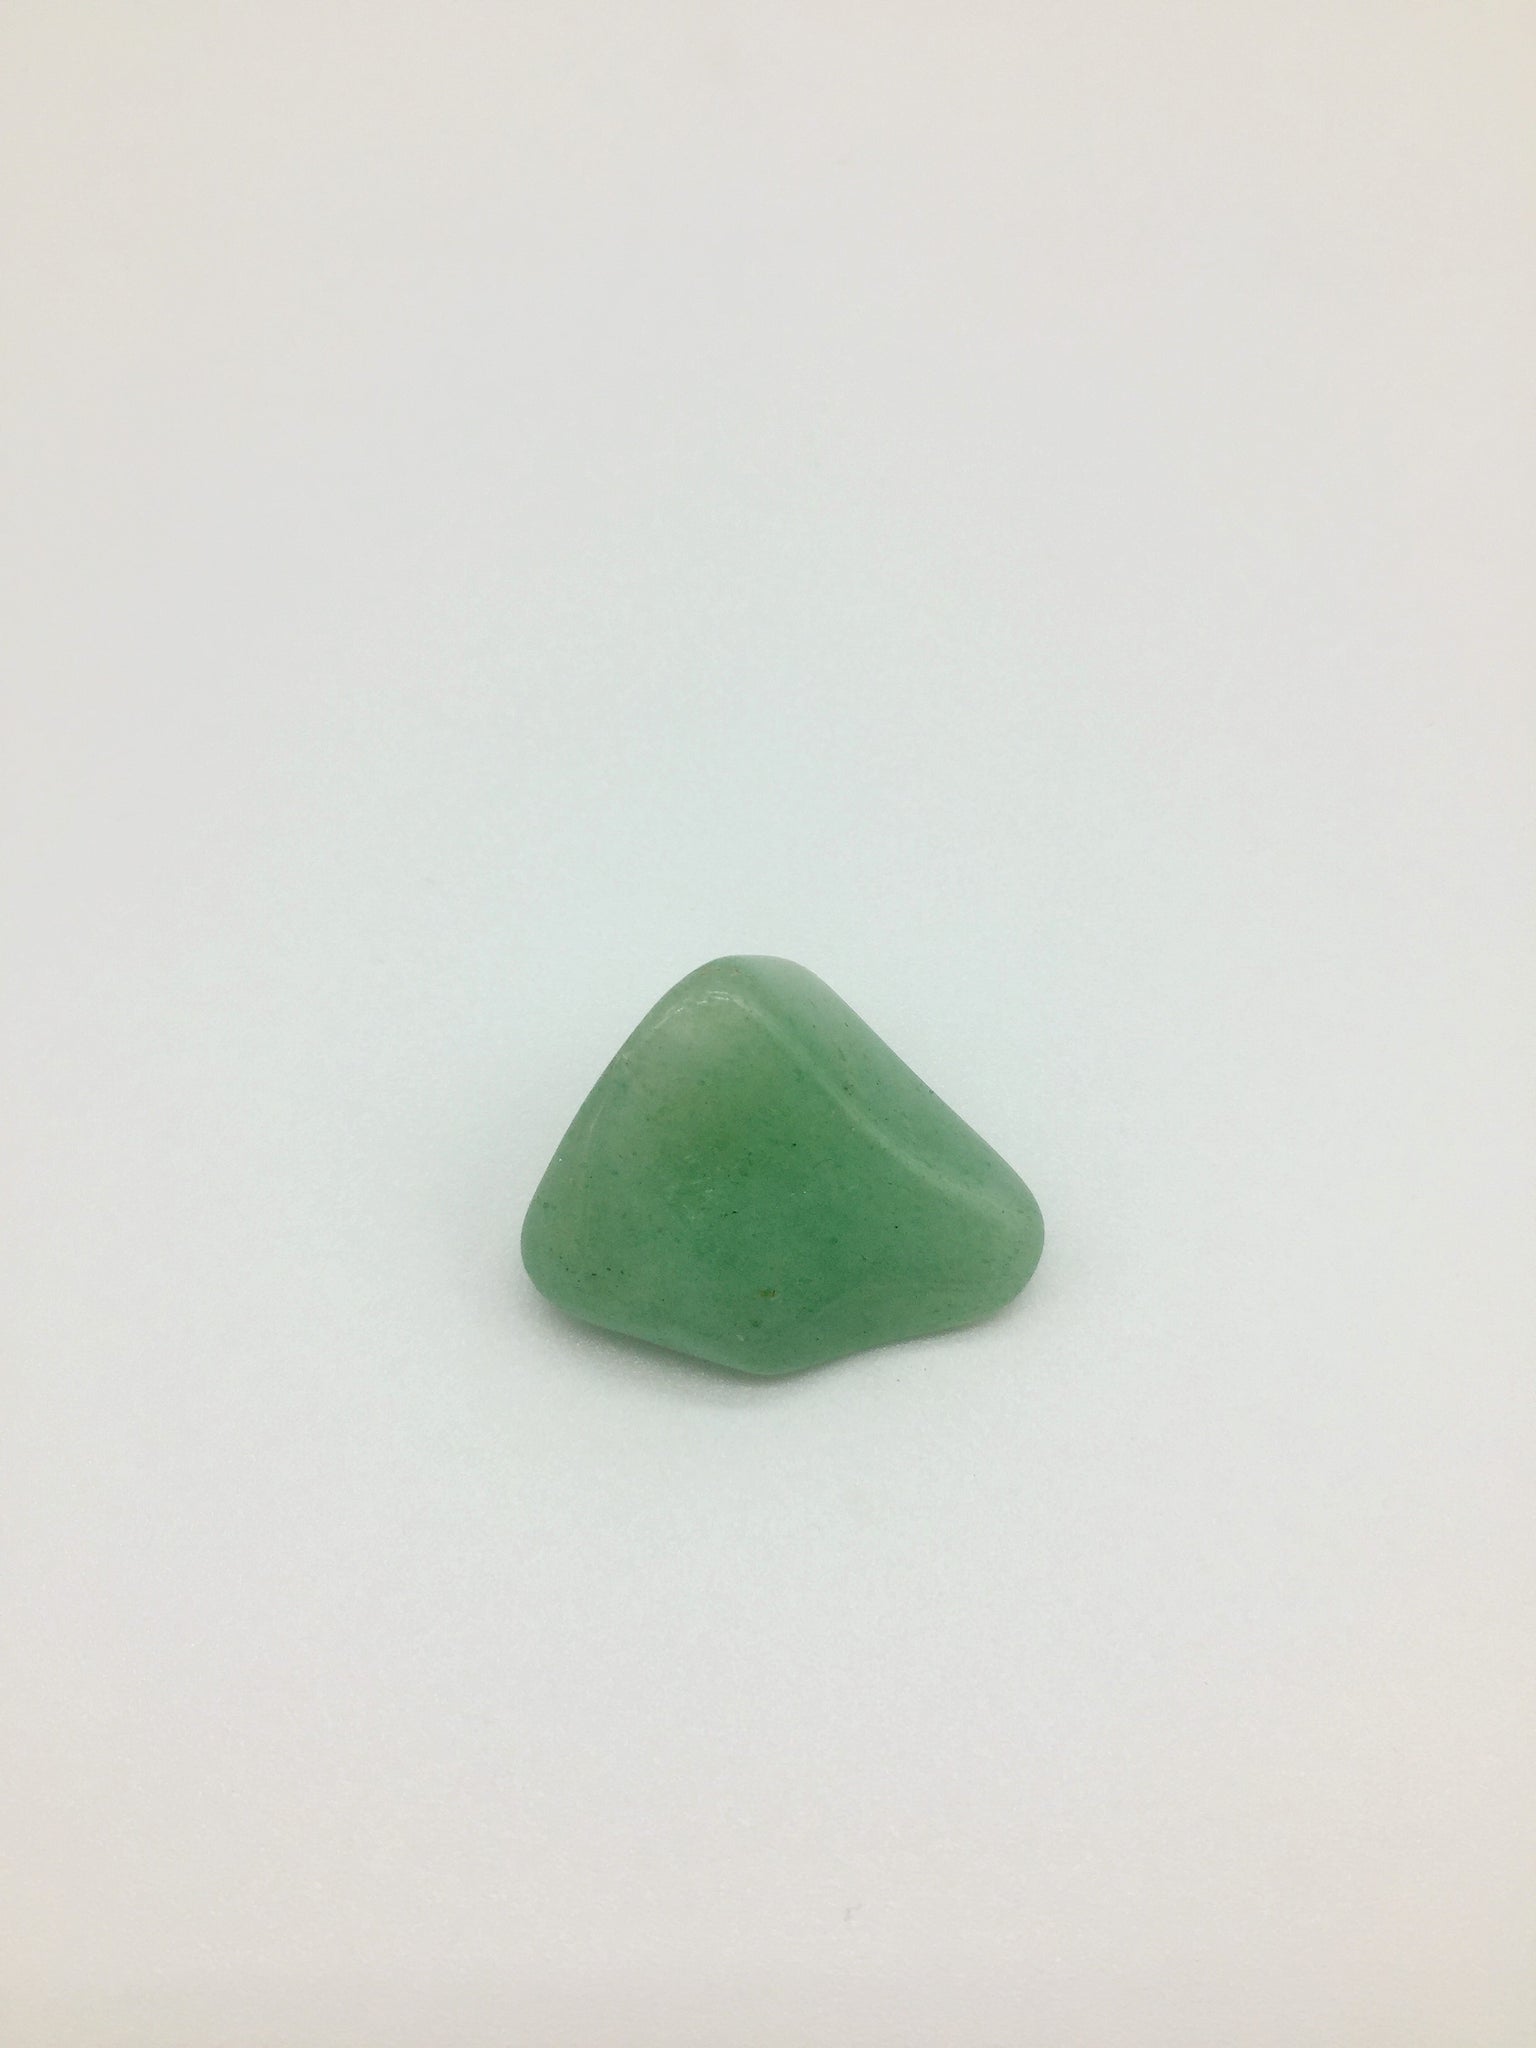 Green Aventurine Holistic Healing stone promotes Motivation & Energising and Health, Luck & prosperity